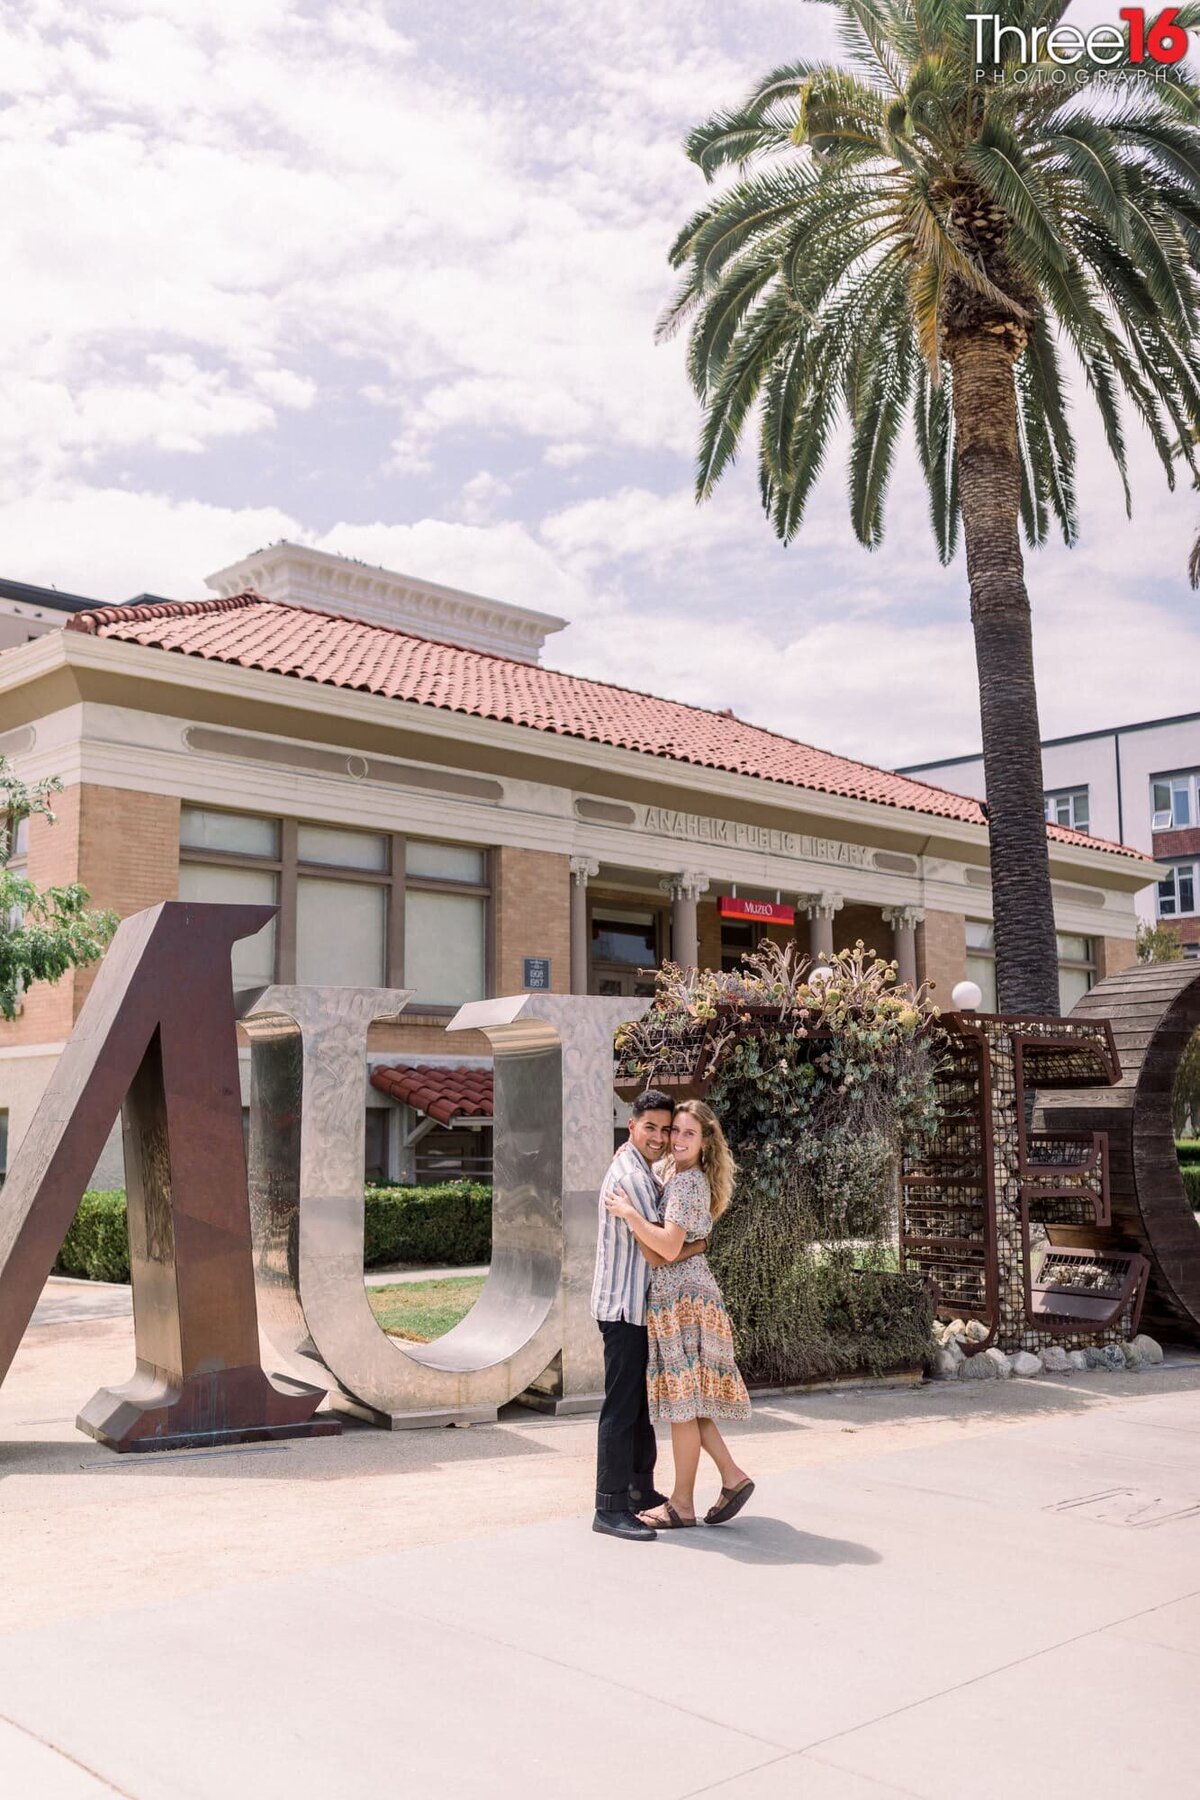 Soon to be married couple cozy up for a photo in front of the MUZEO sign out front of the Anaheim Public Library